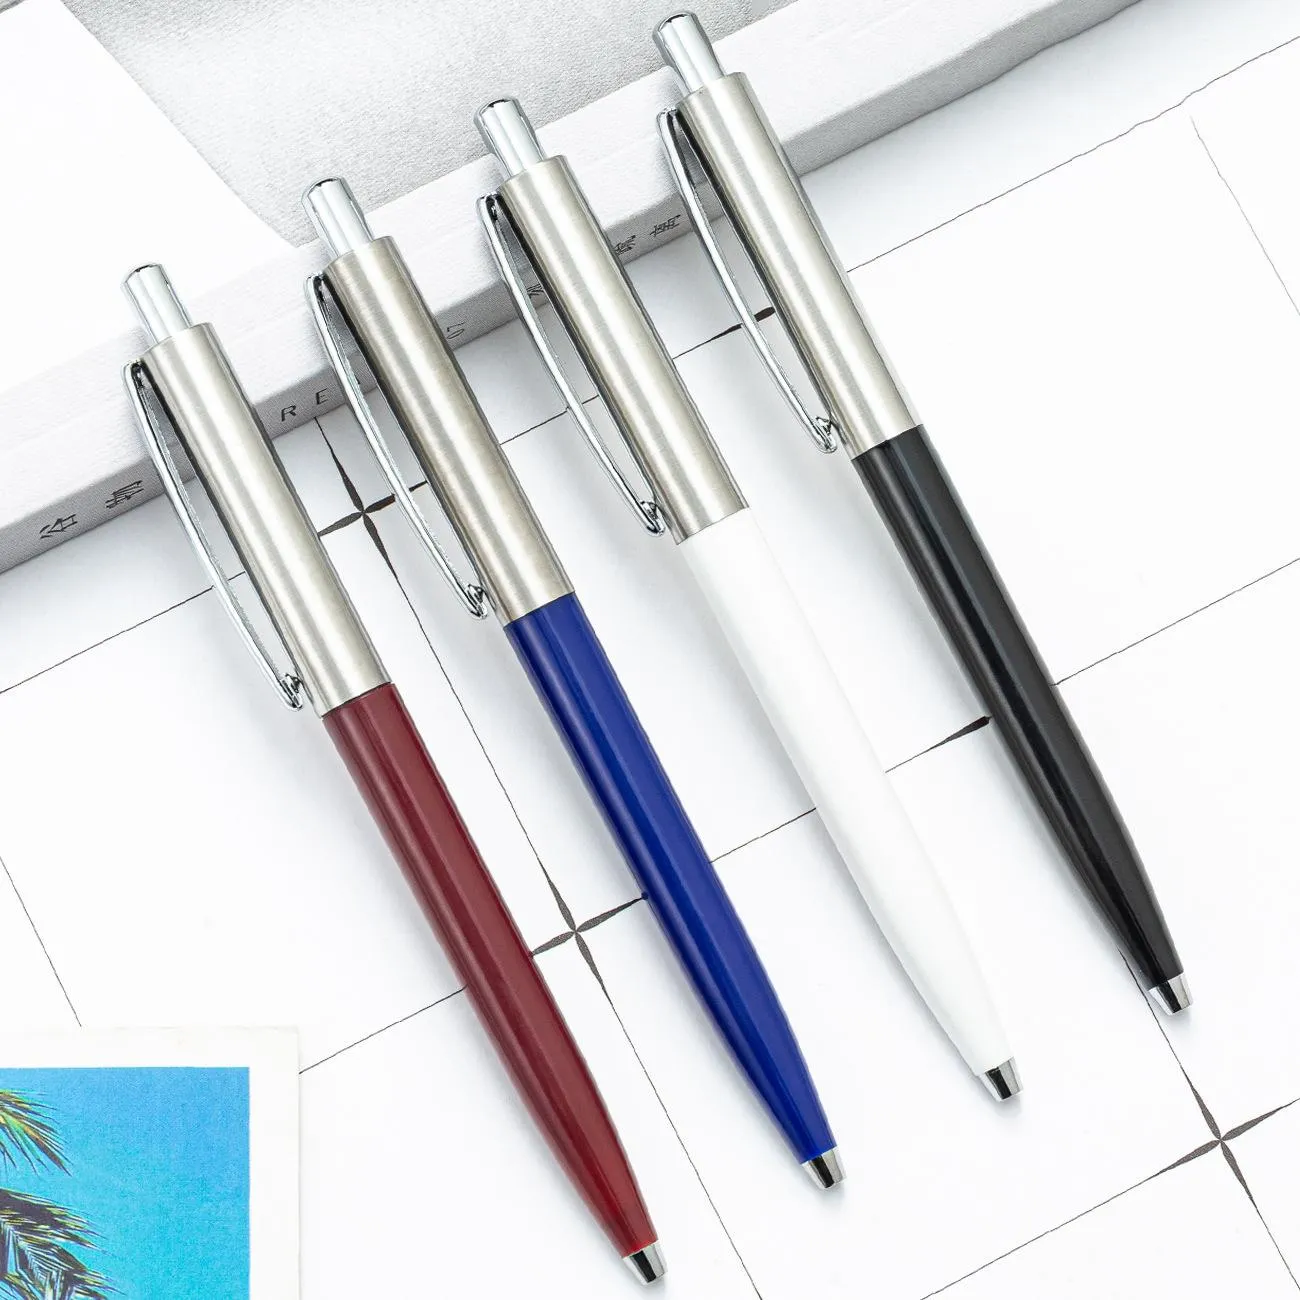 Press A Ball-point Pen New Supply Multicolor Aluminum Rod Stationery For School Students Write Examination Office Business Advertising Integral Purchase Gift Pens